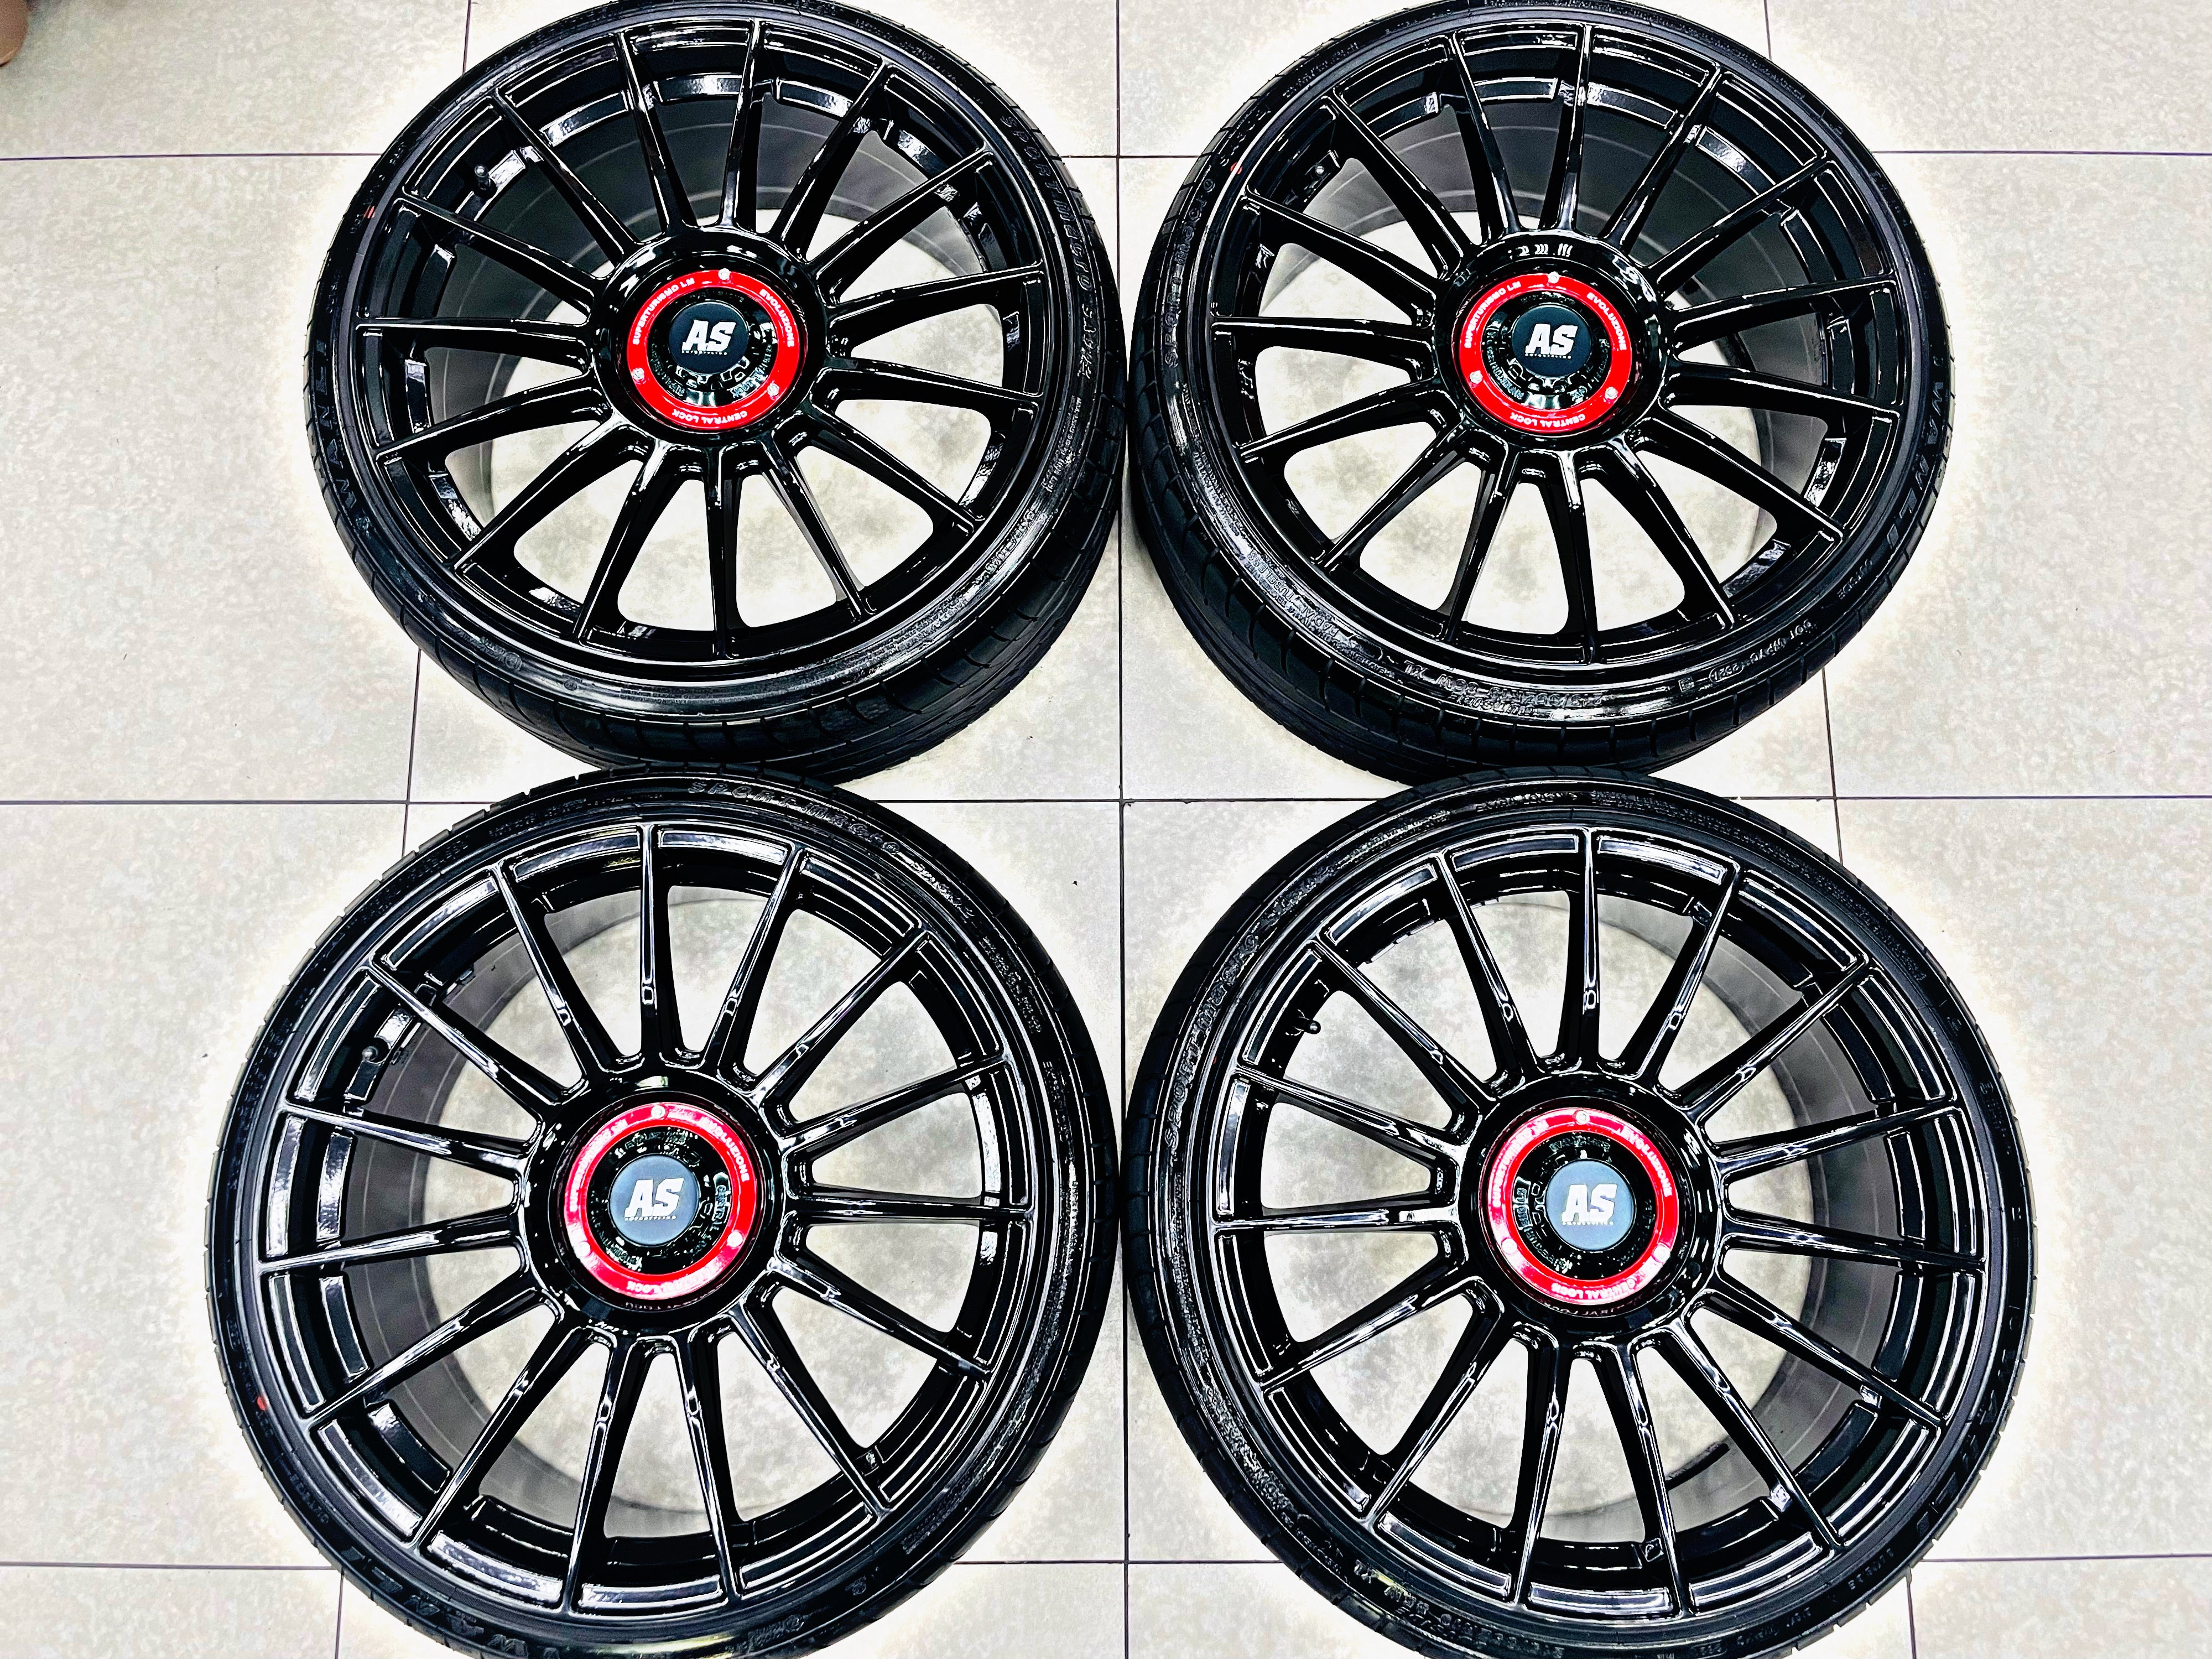 19” AS-SUPERTURISMO  5/112 & 5x100 multi PCD  GLOSS BLACK WITH 215/35/19 TYRES